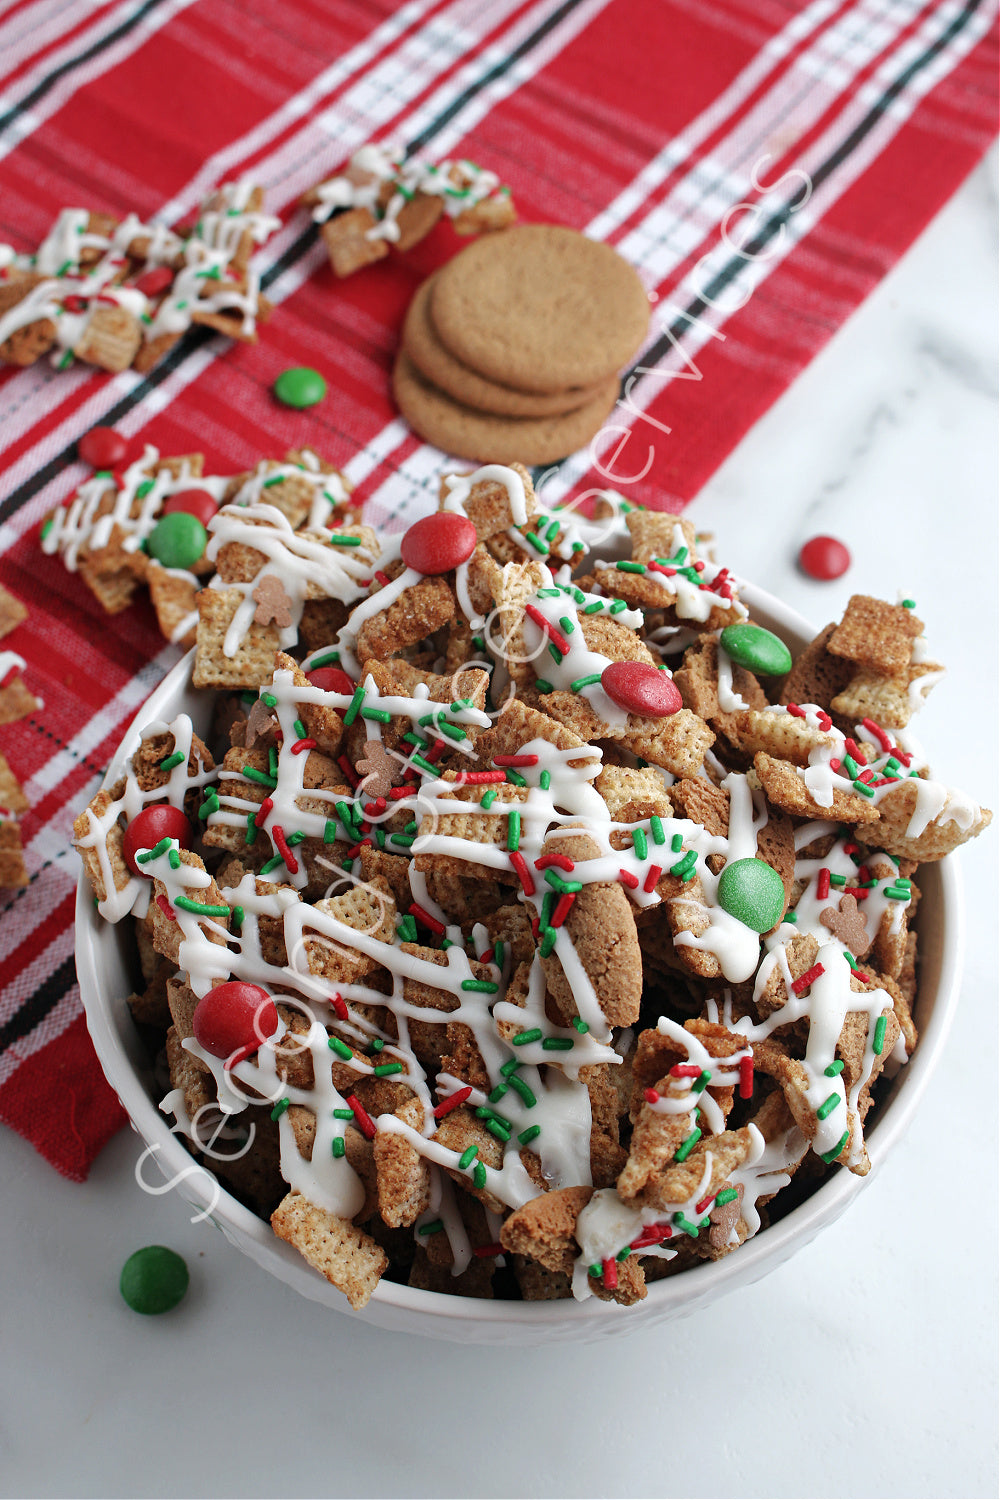 Gingerbread Snack Mix - Set 1 of 4